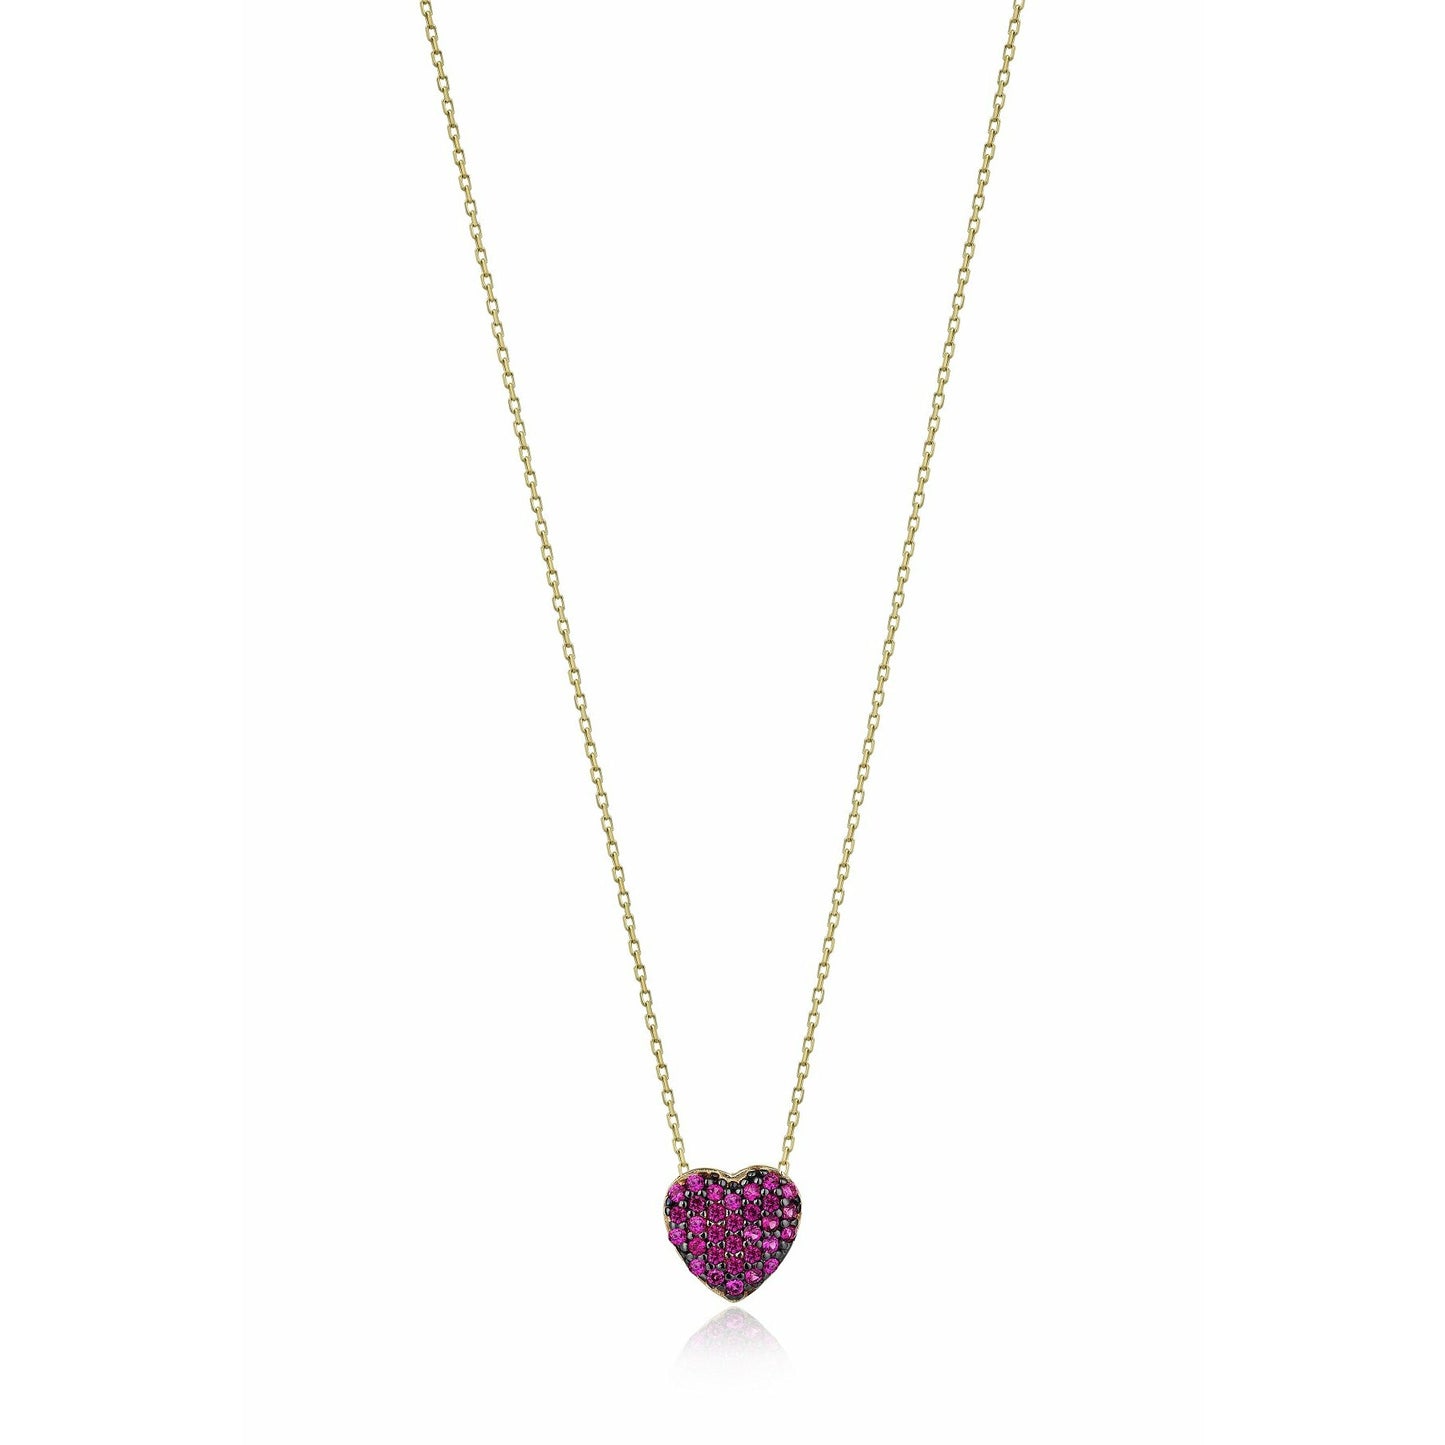 Gift 14K Gold Heart Necklace 